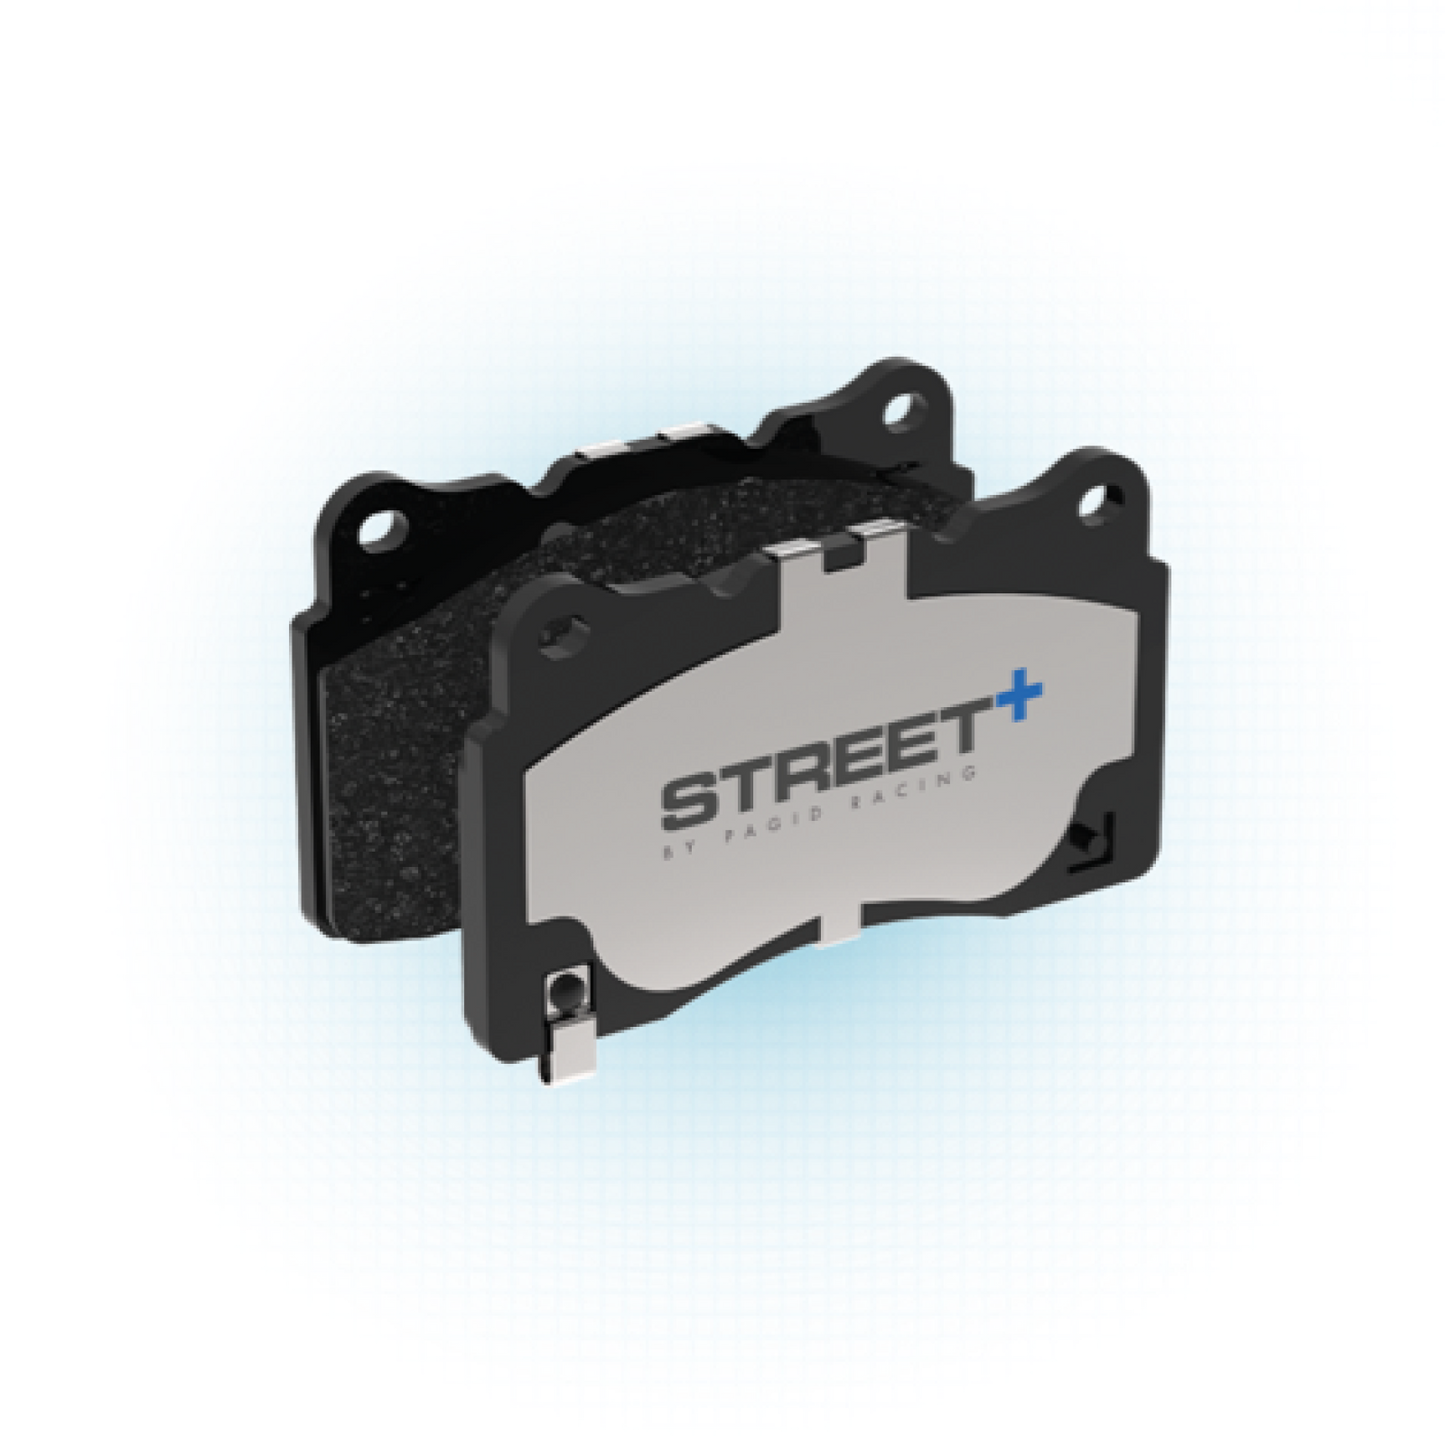 Pagid Street+ FPV Falcon Pickup (BF) Front Brake Pads T8052SP2001